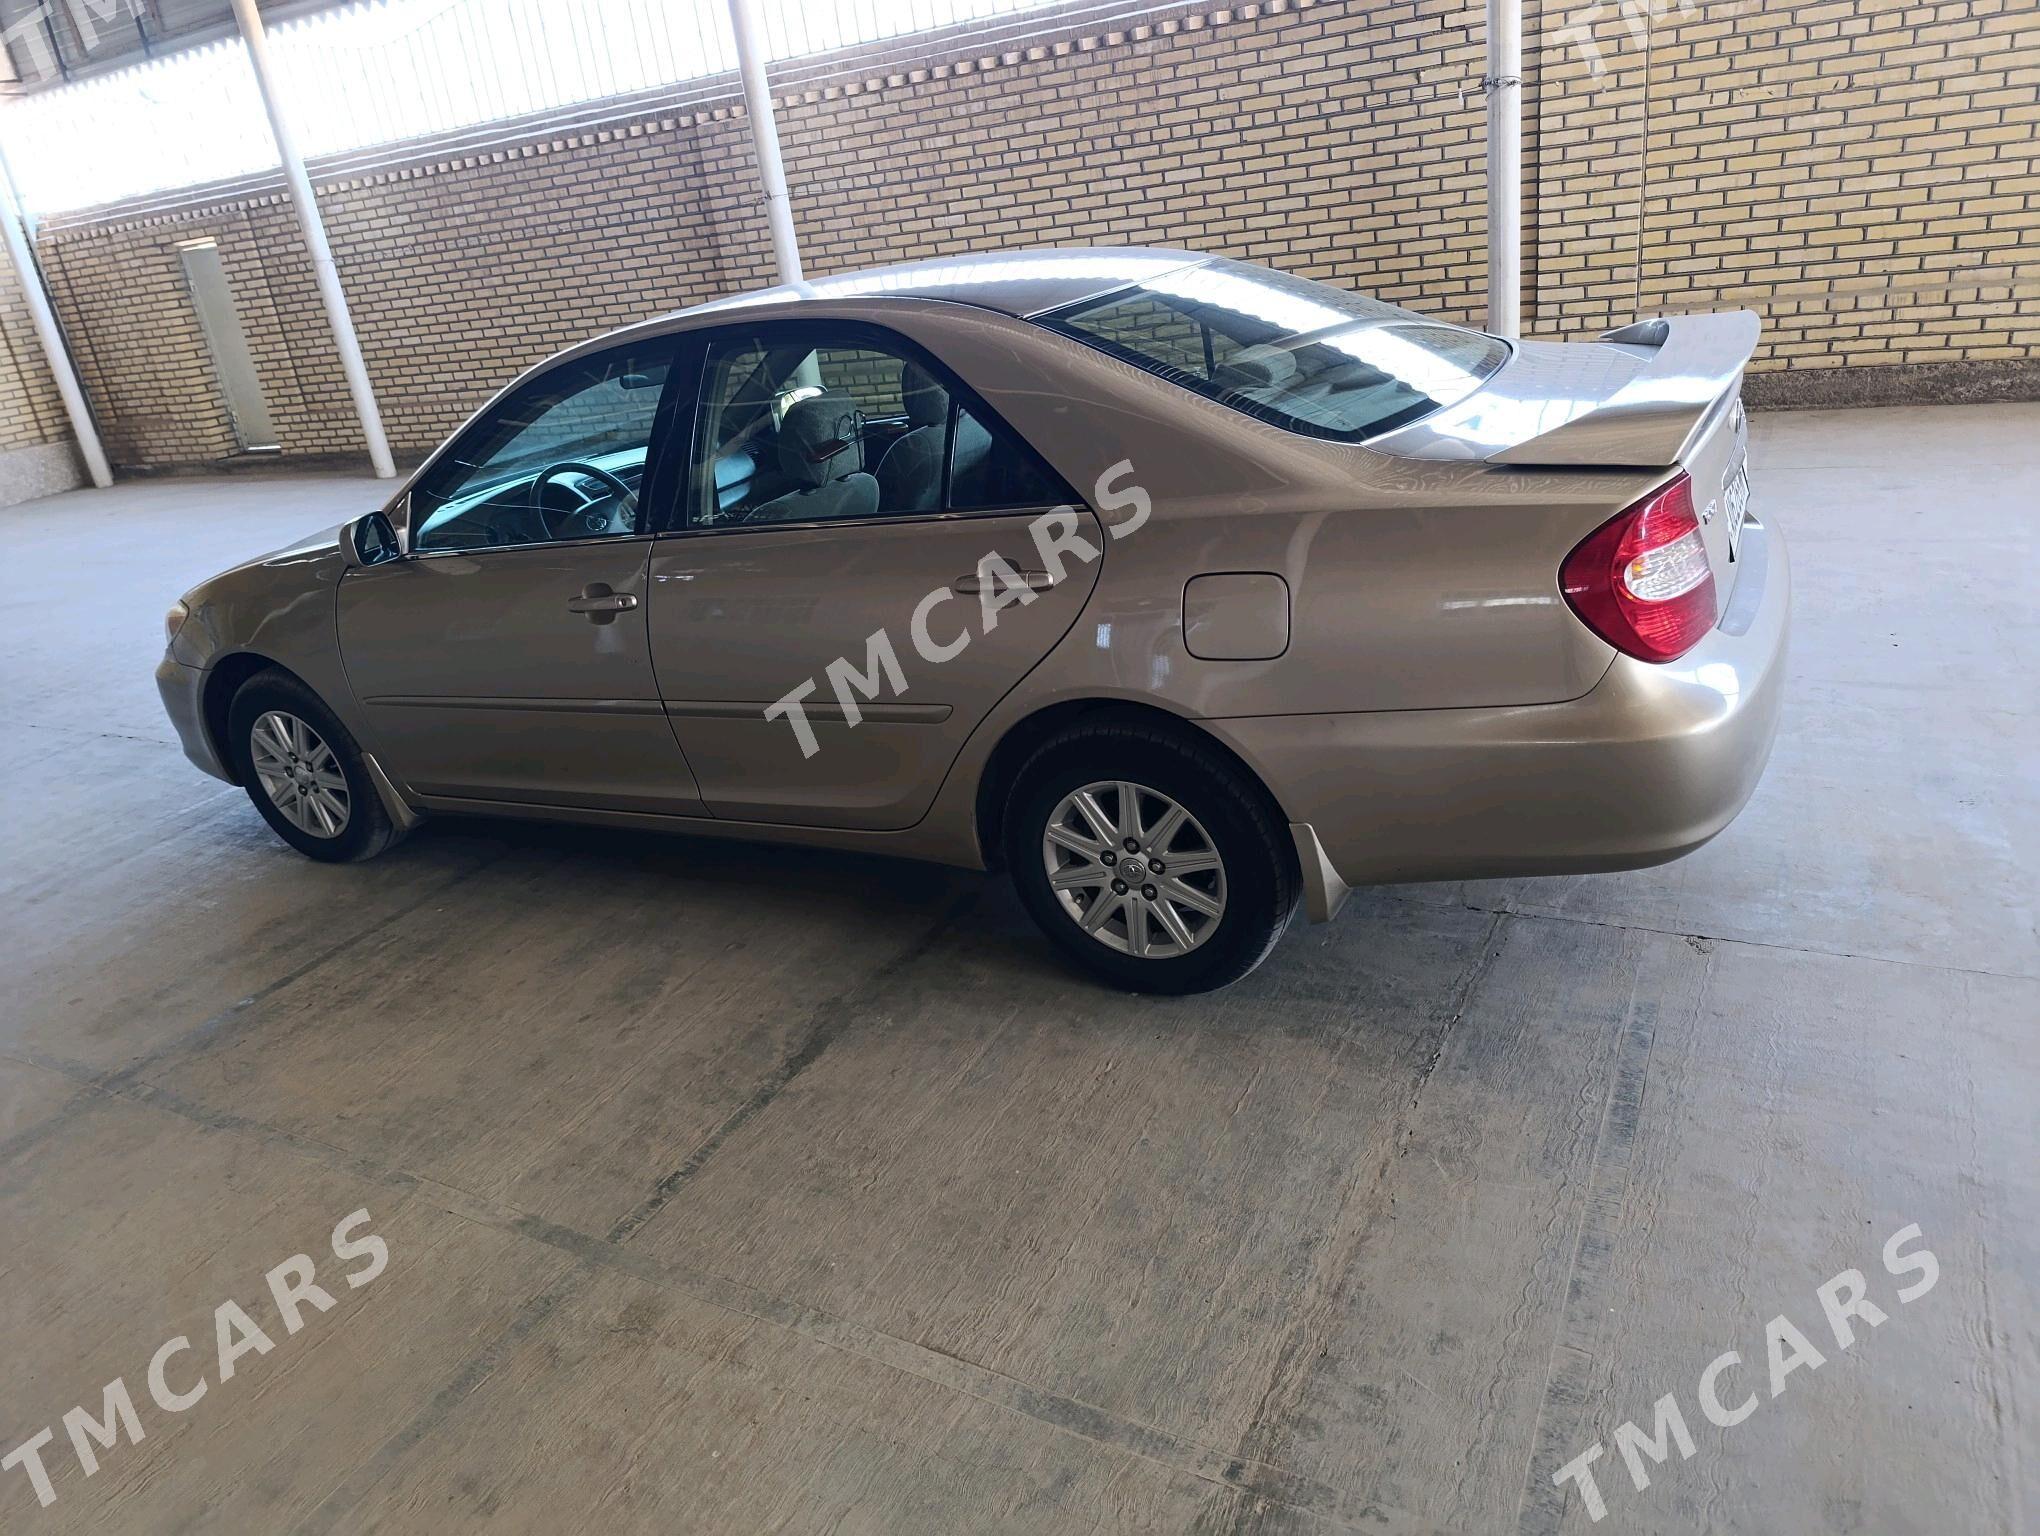 Toyota Camry 2002 - 160 000 TMT - Mary - img 3